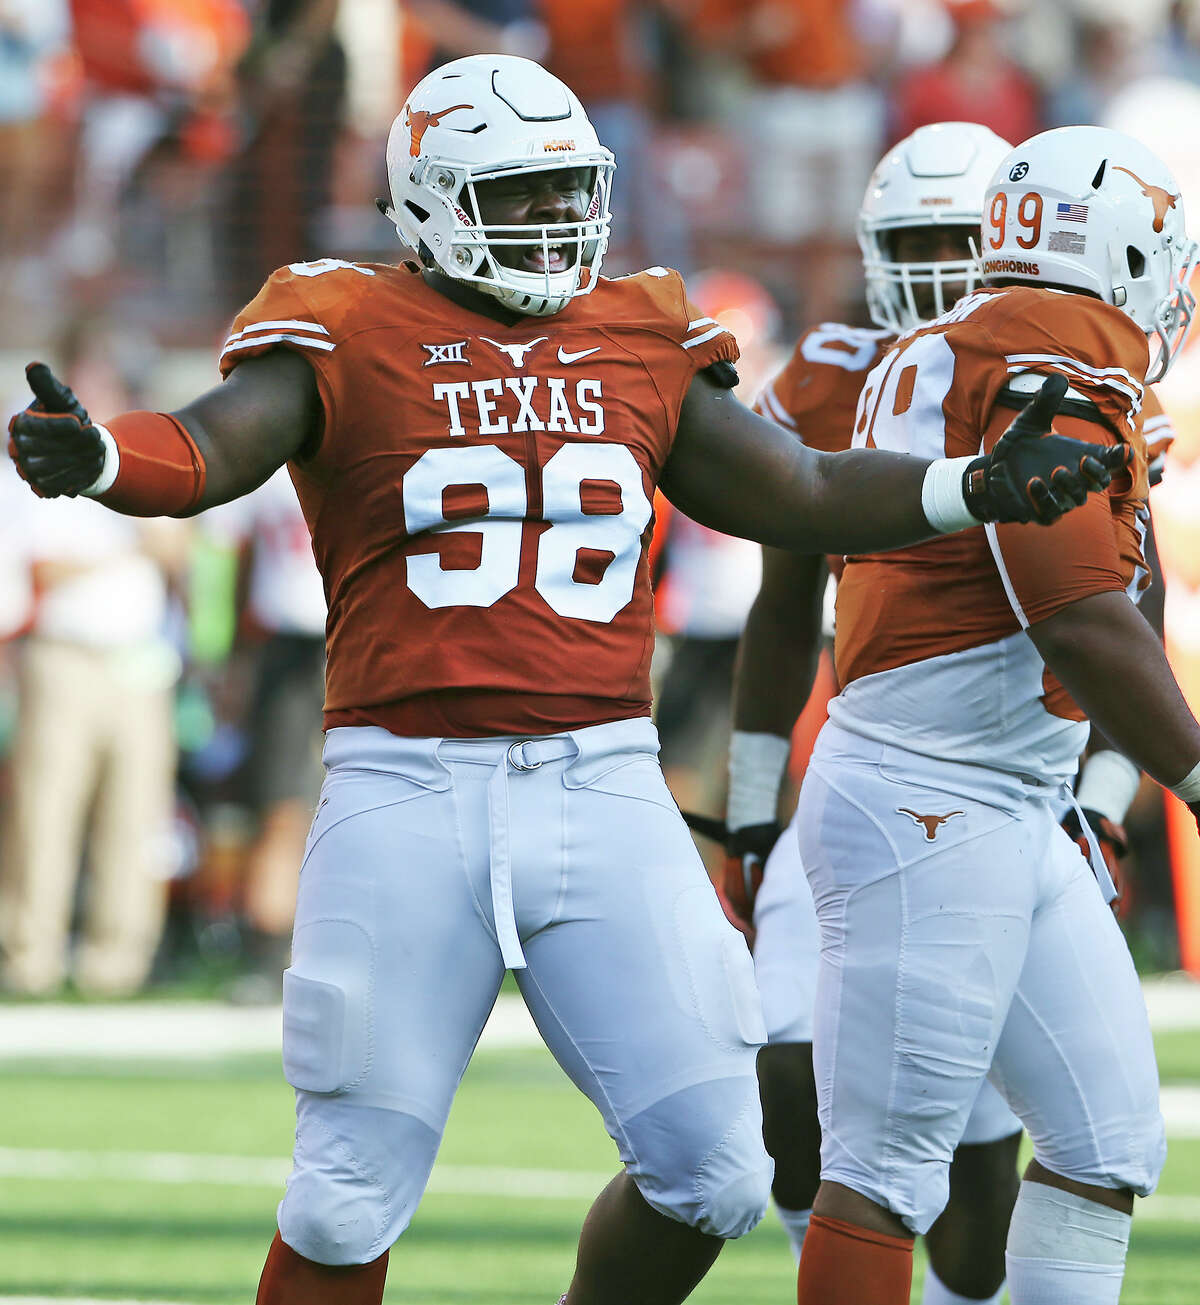 Longhorn defensive tackle Hassan Ridgeway celebrates a sack as Texas hosts Oklahoma State at DKR Stadium on September 26, 2015. Ridgeway is the only Longhorn who will attend the NFL Combine.